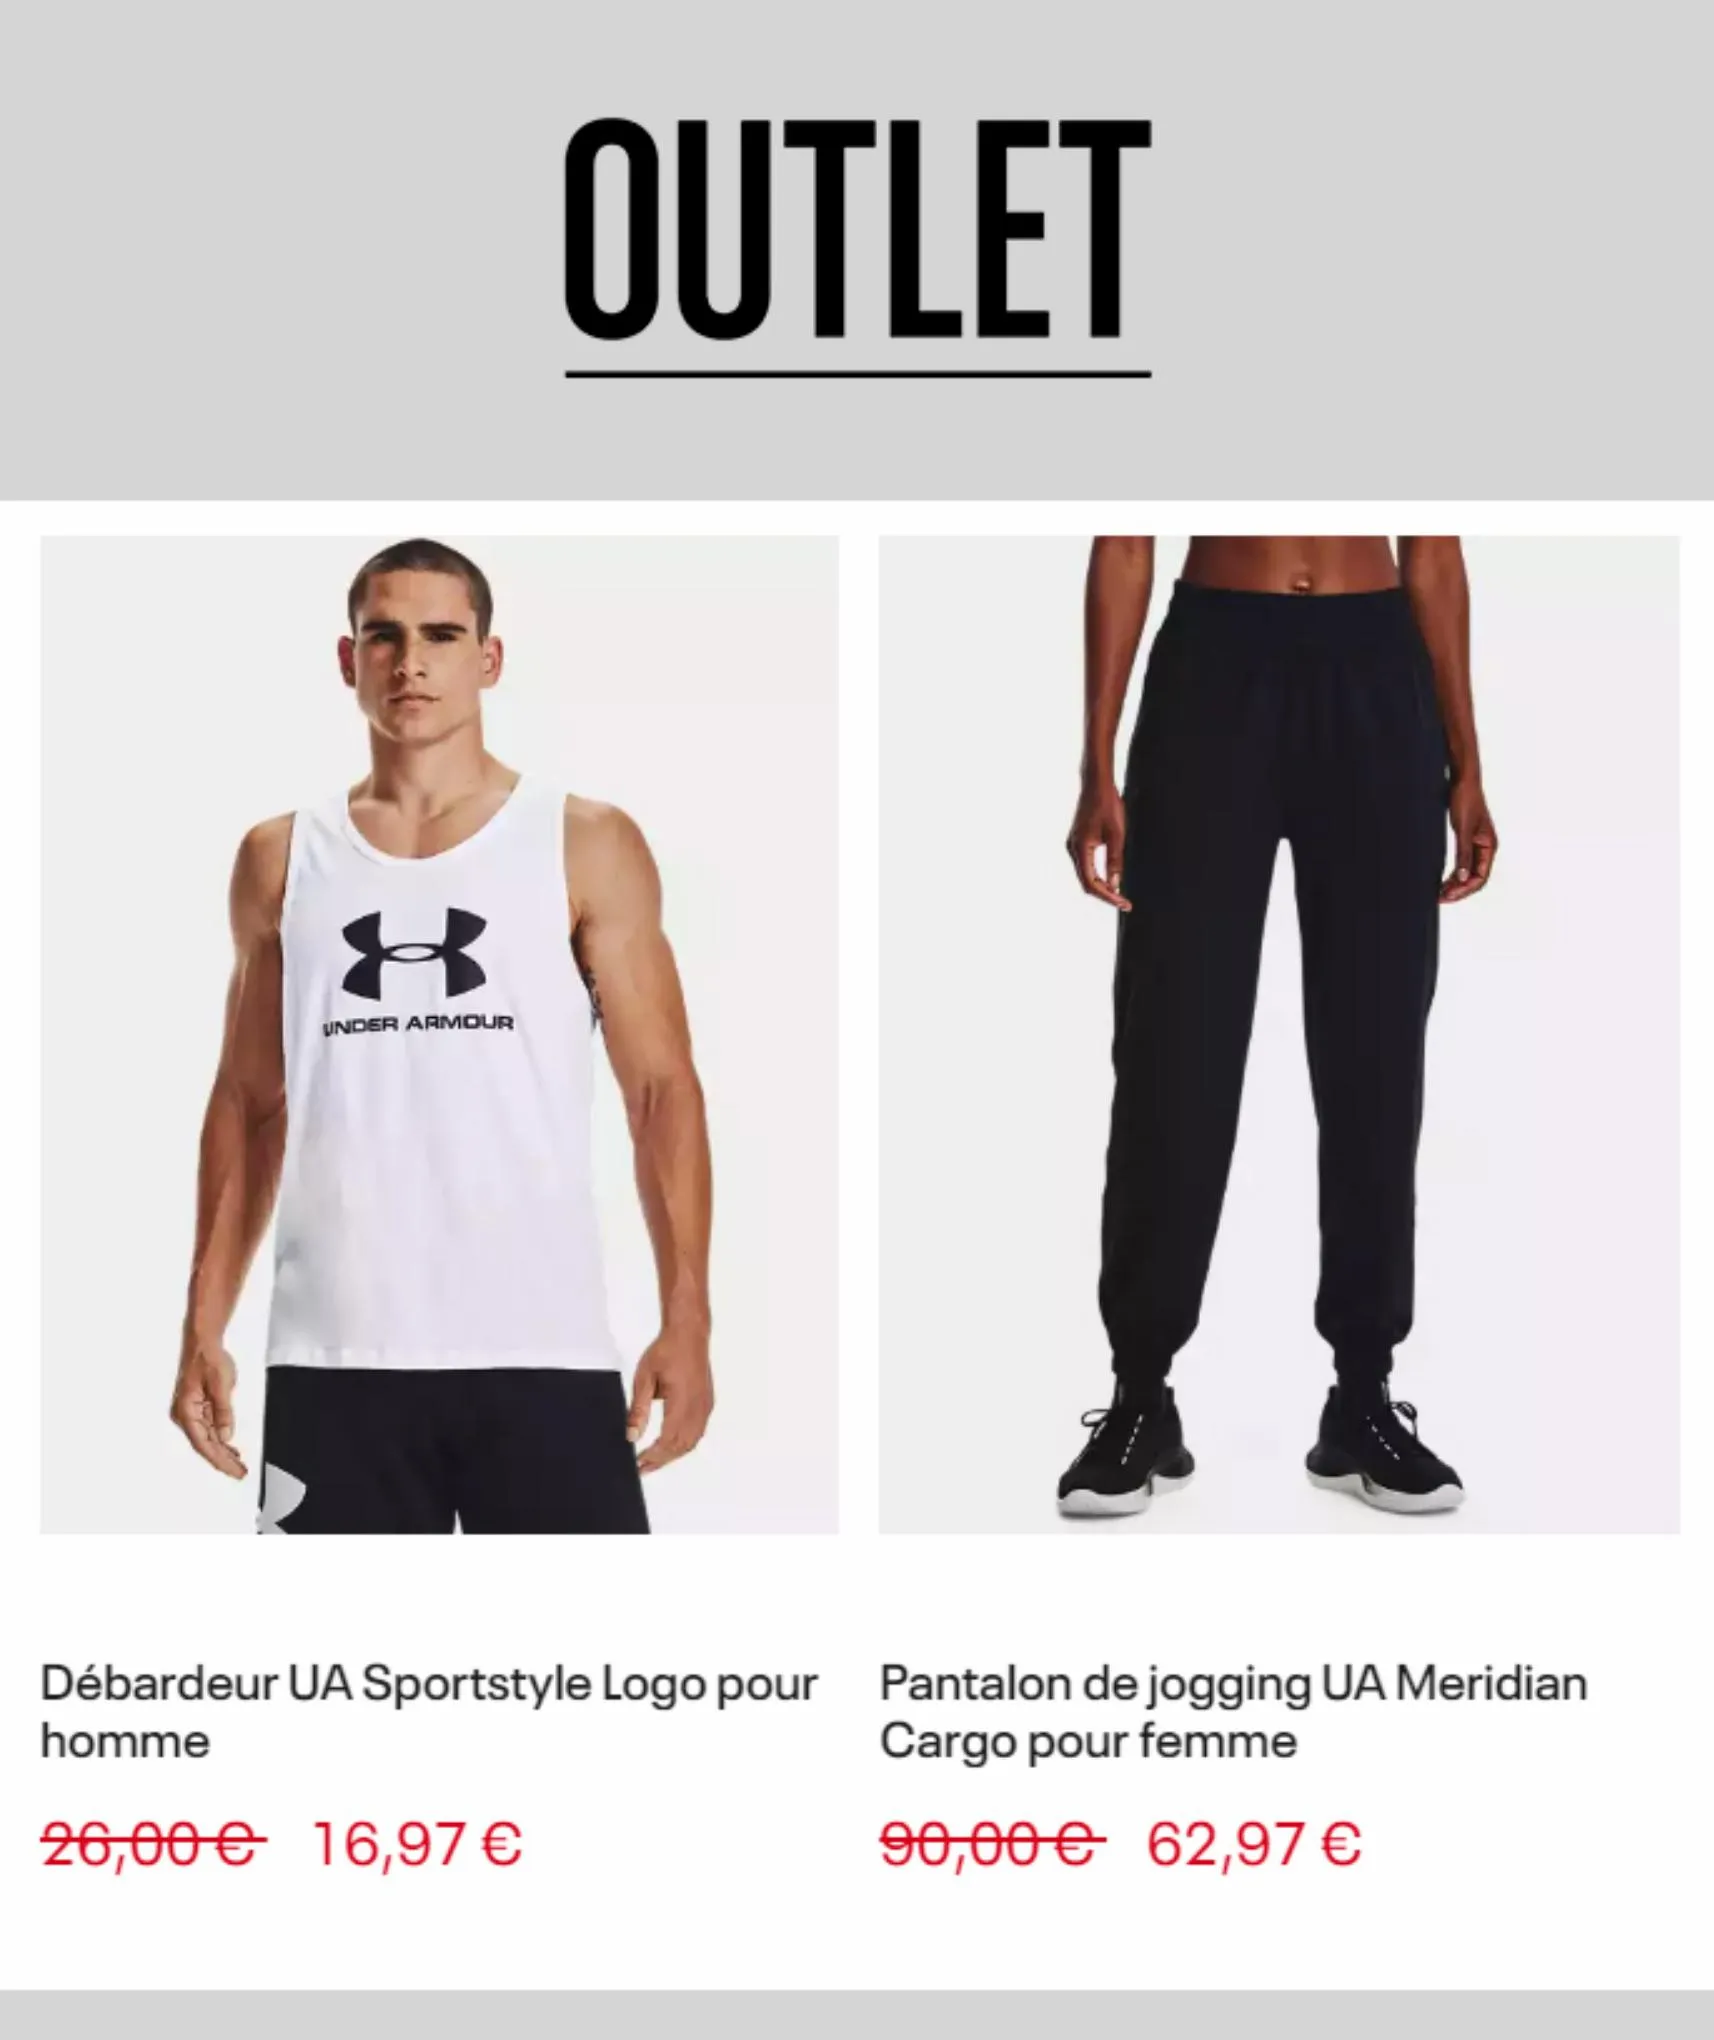 Catalogue Outlet Under Armour, page 00004